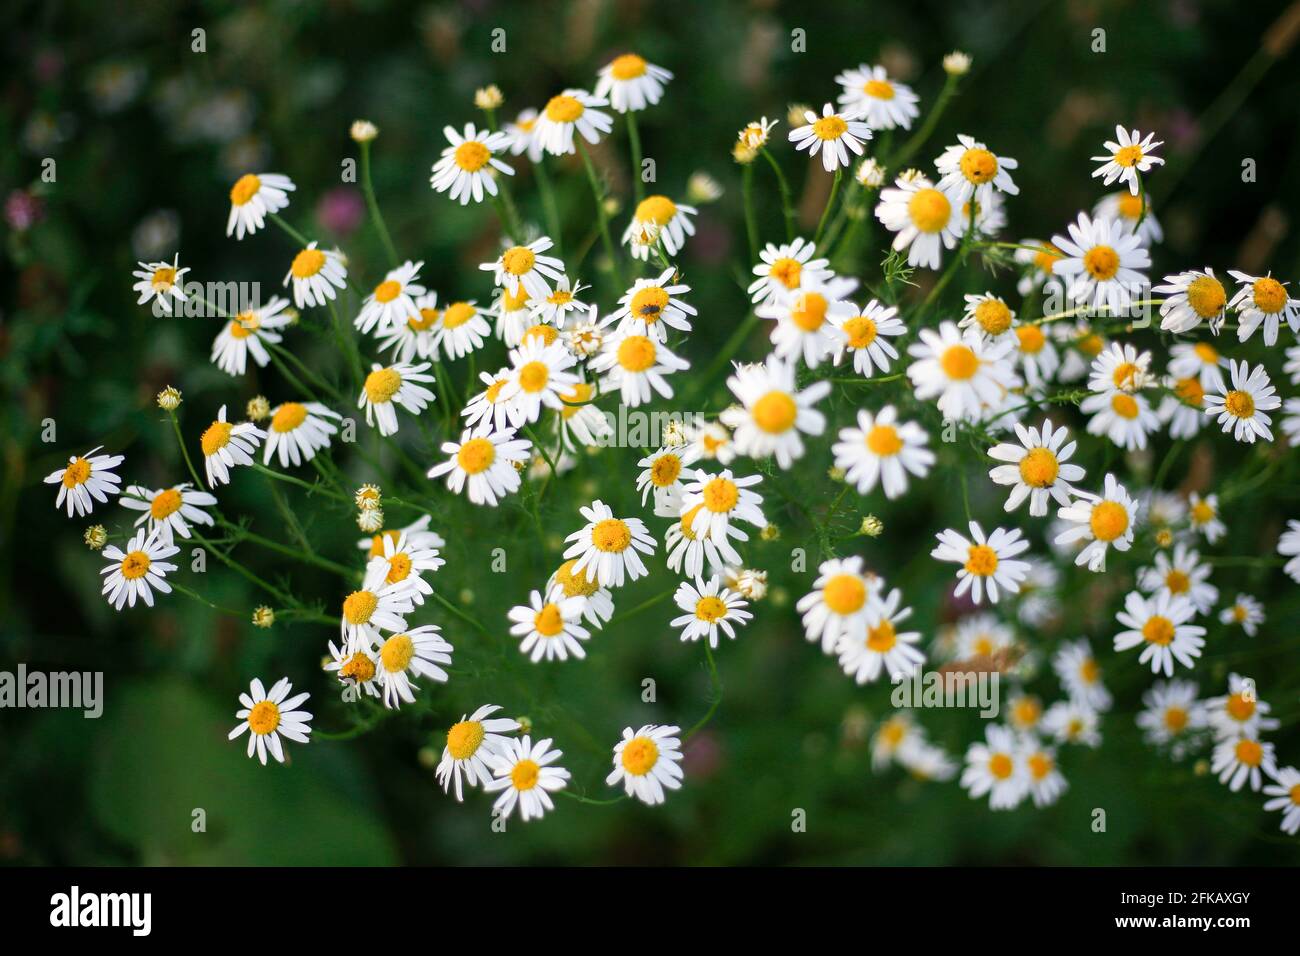 Field daisies in the wild. Flowers with white petals. Stock Photo